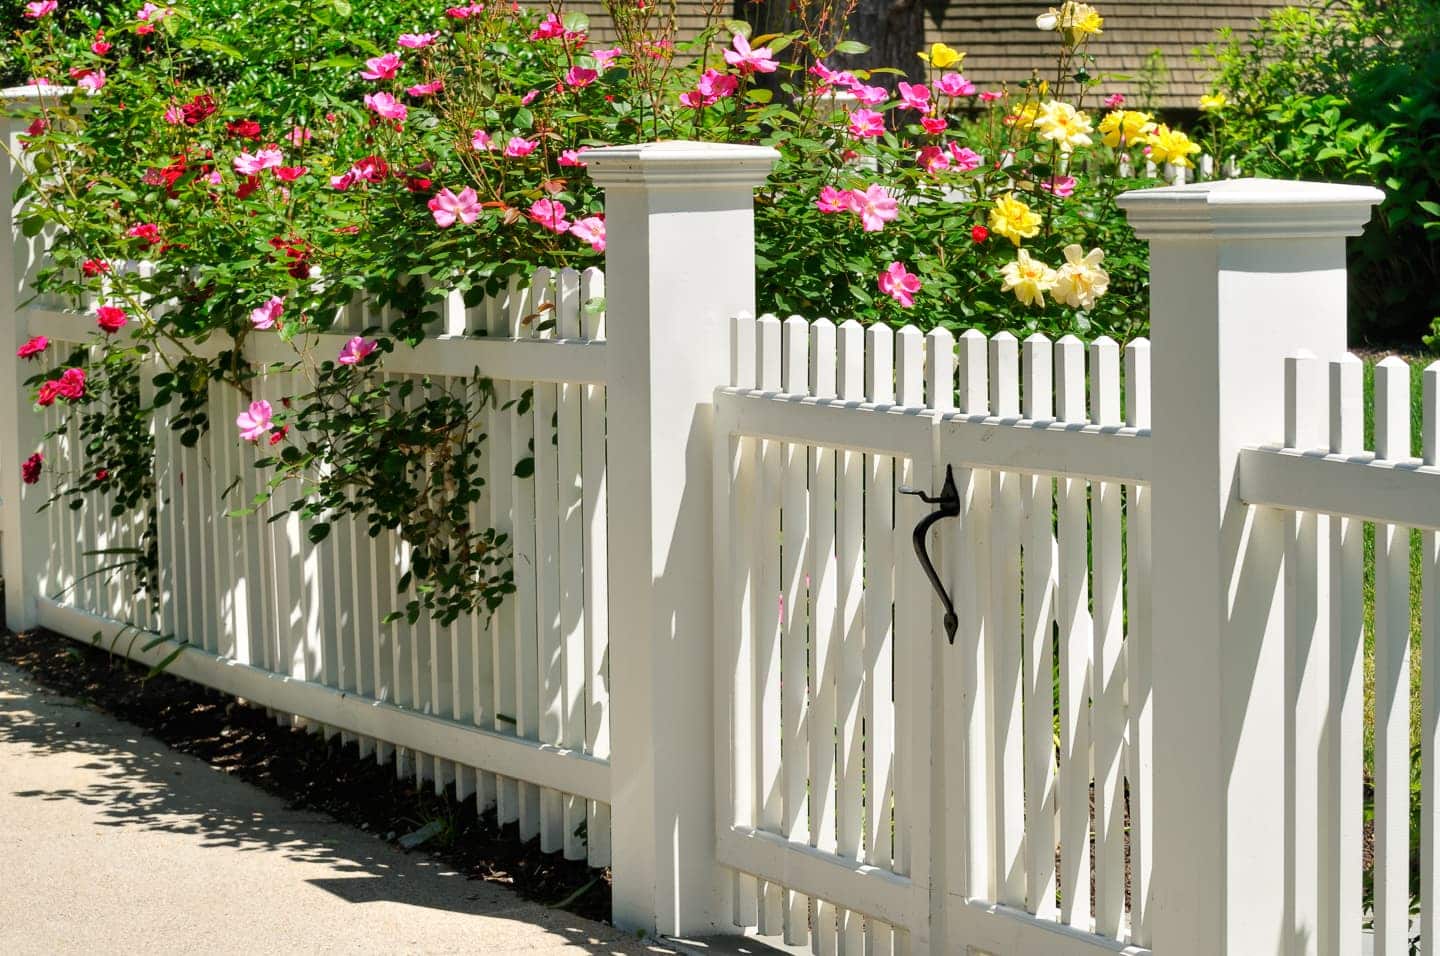 A white picket fence with roses growing on it.